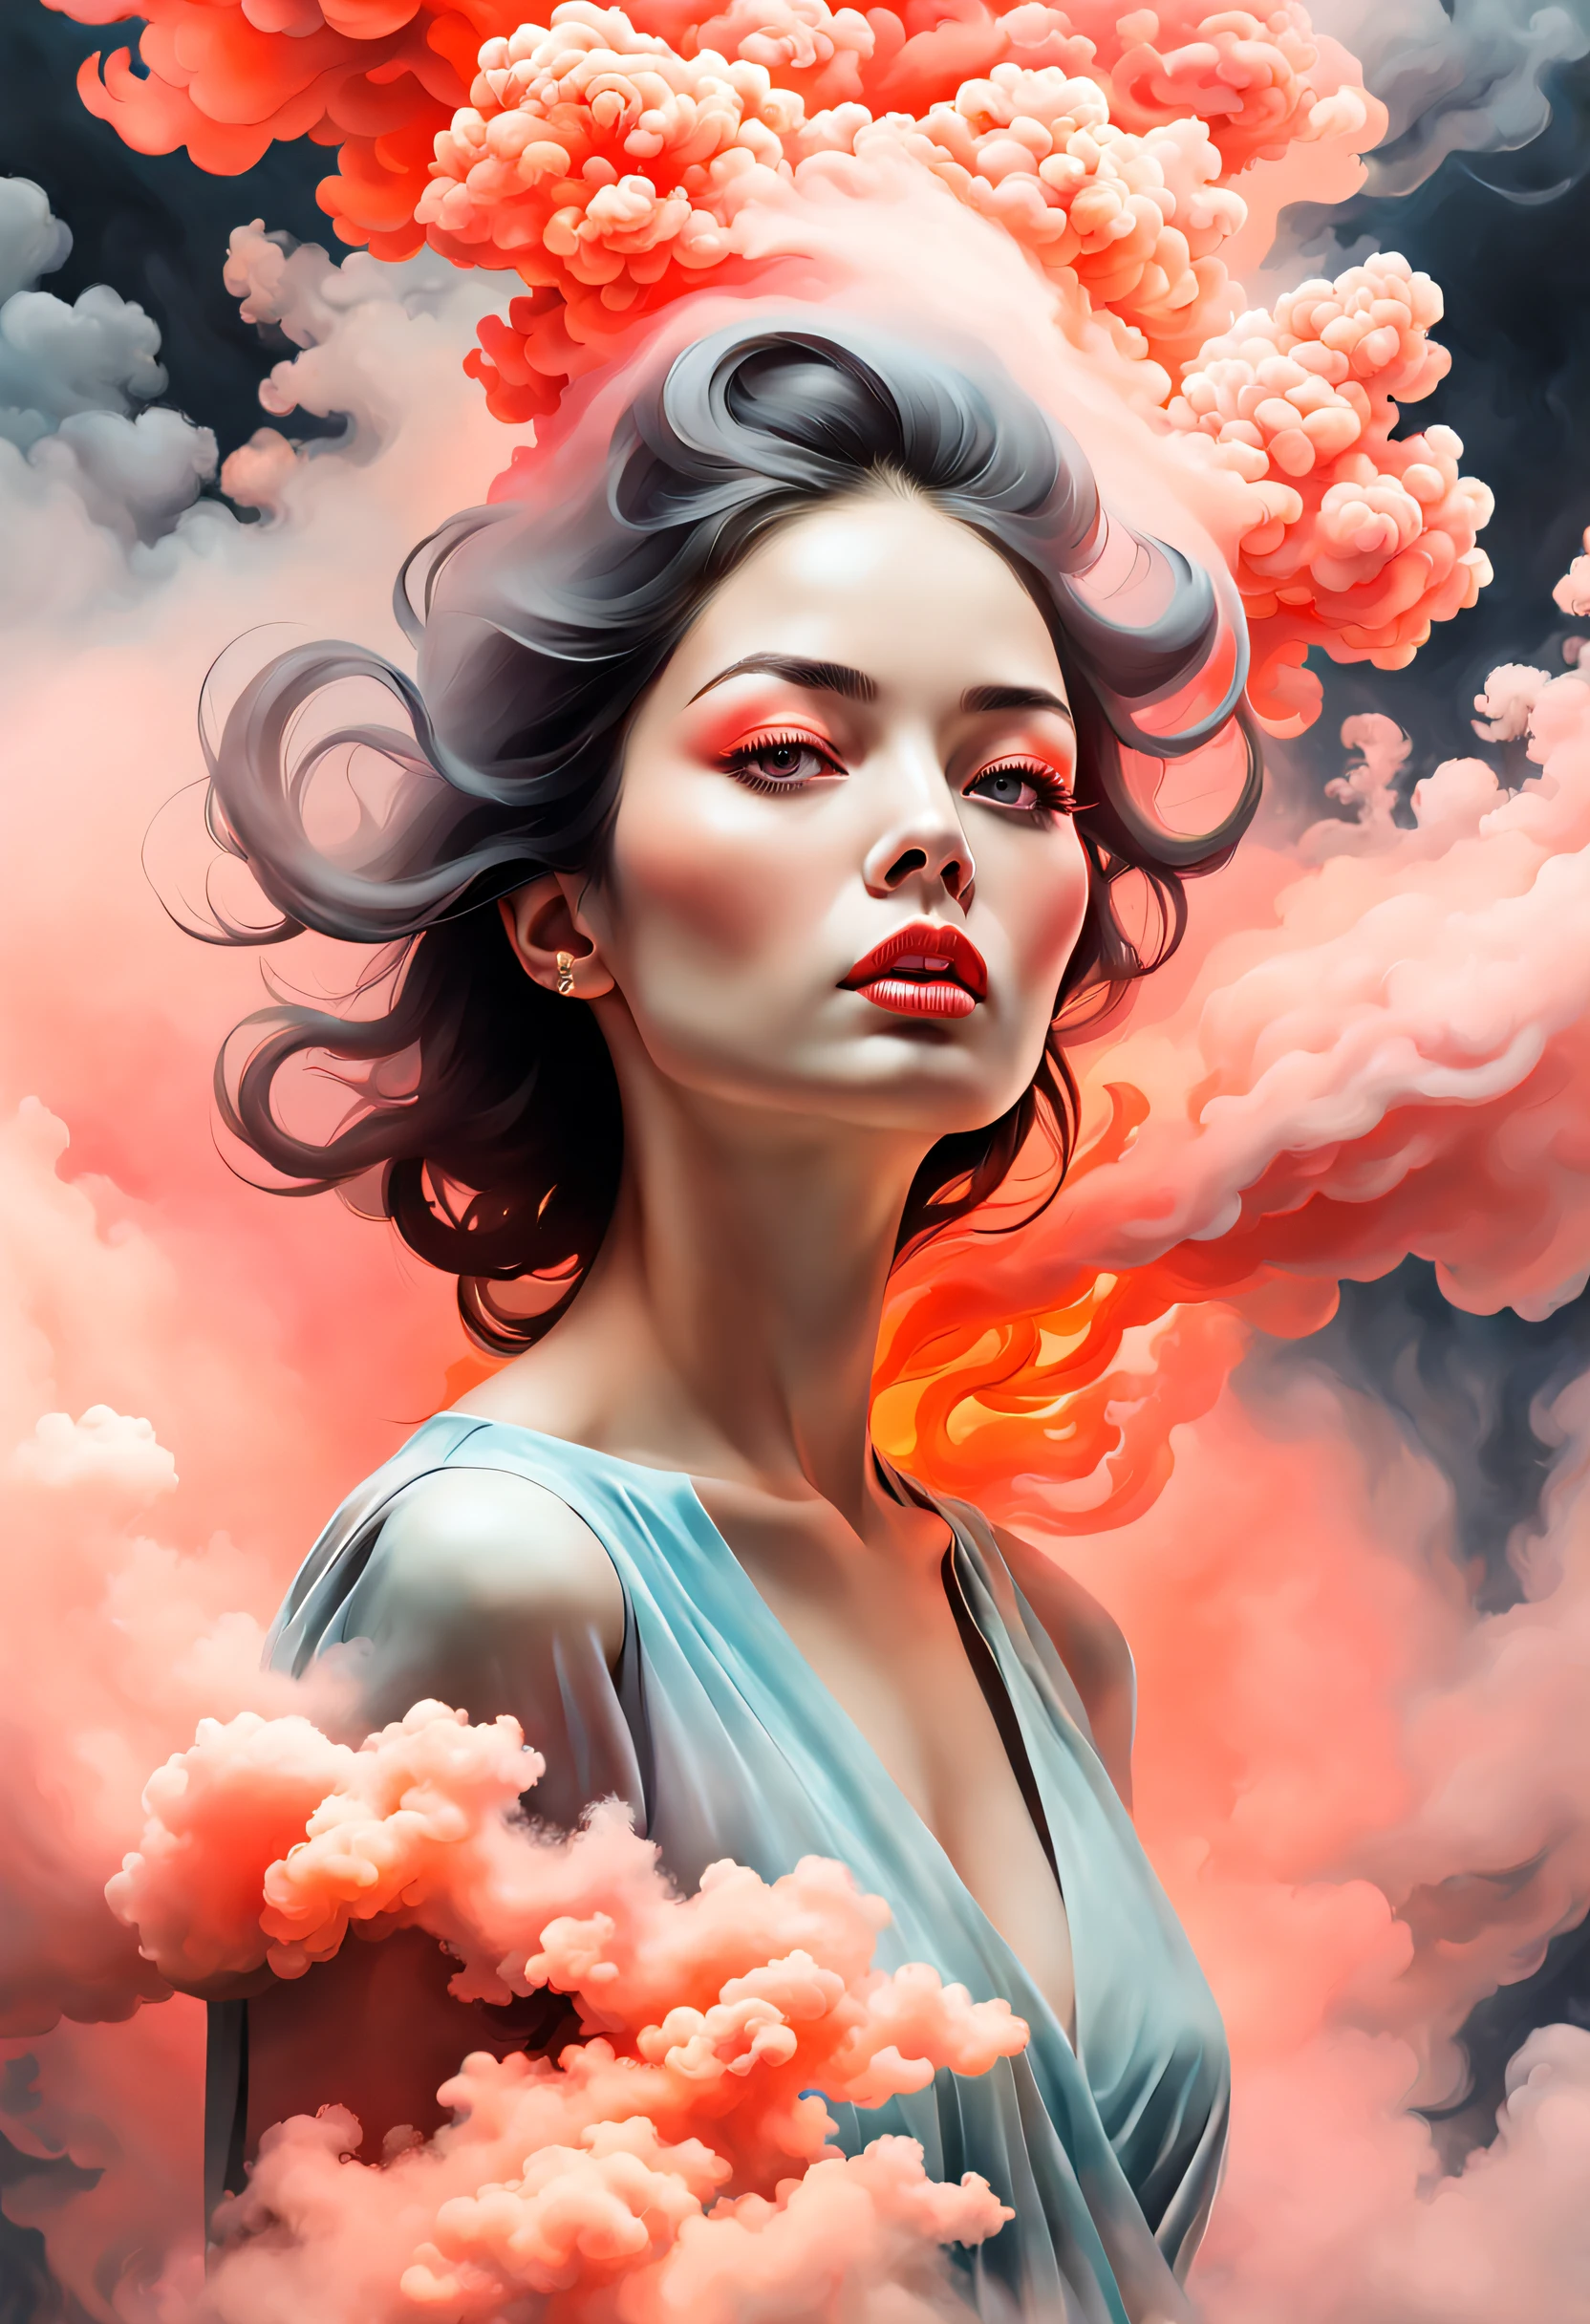 portrait of a woman covered in cloud of smoke, whirlwind, coral highlight colors, coral make-up, hints of pastel, misty, seductive, sultry, breathtaking, oil painting style, artistic, aesthetic modern art, hyper-realism